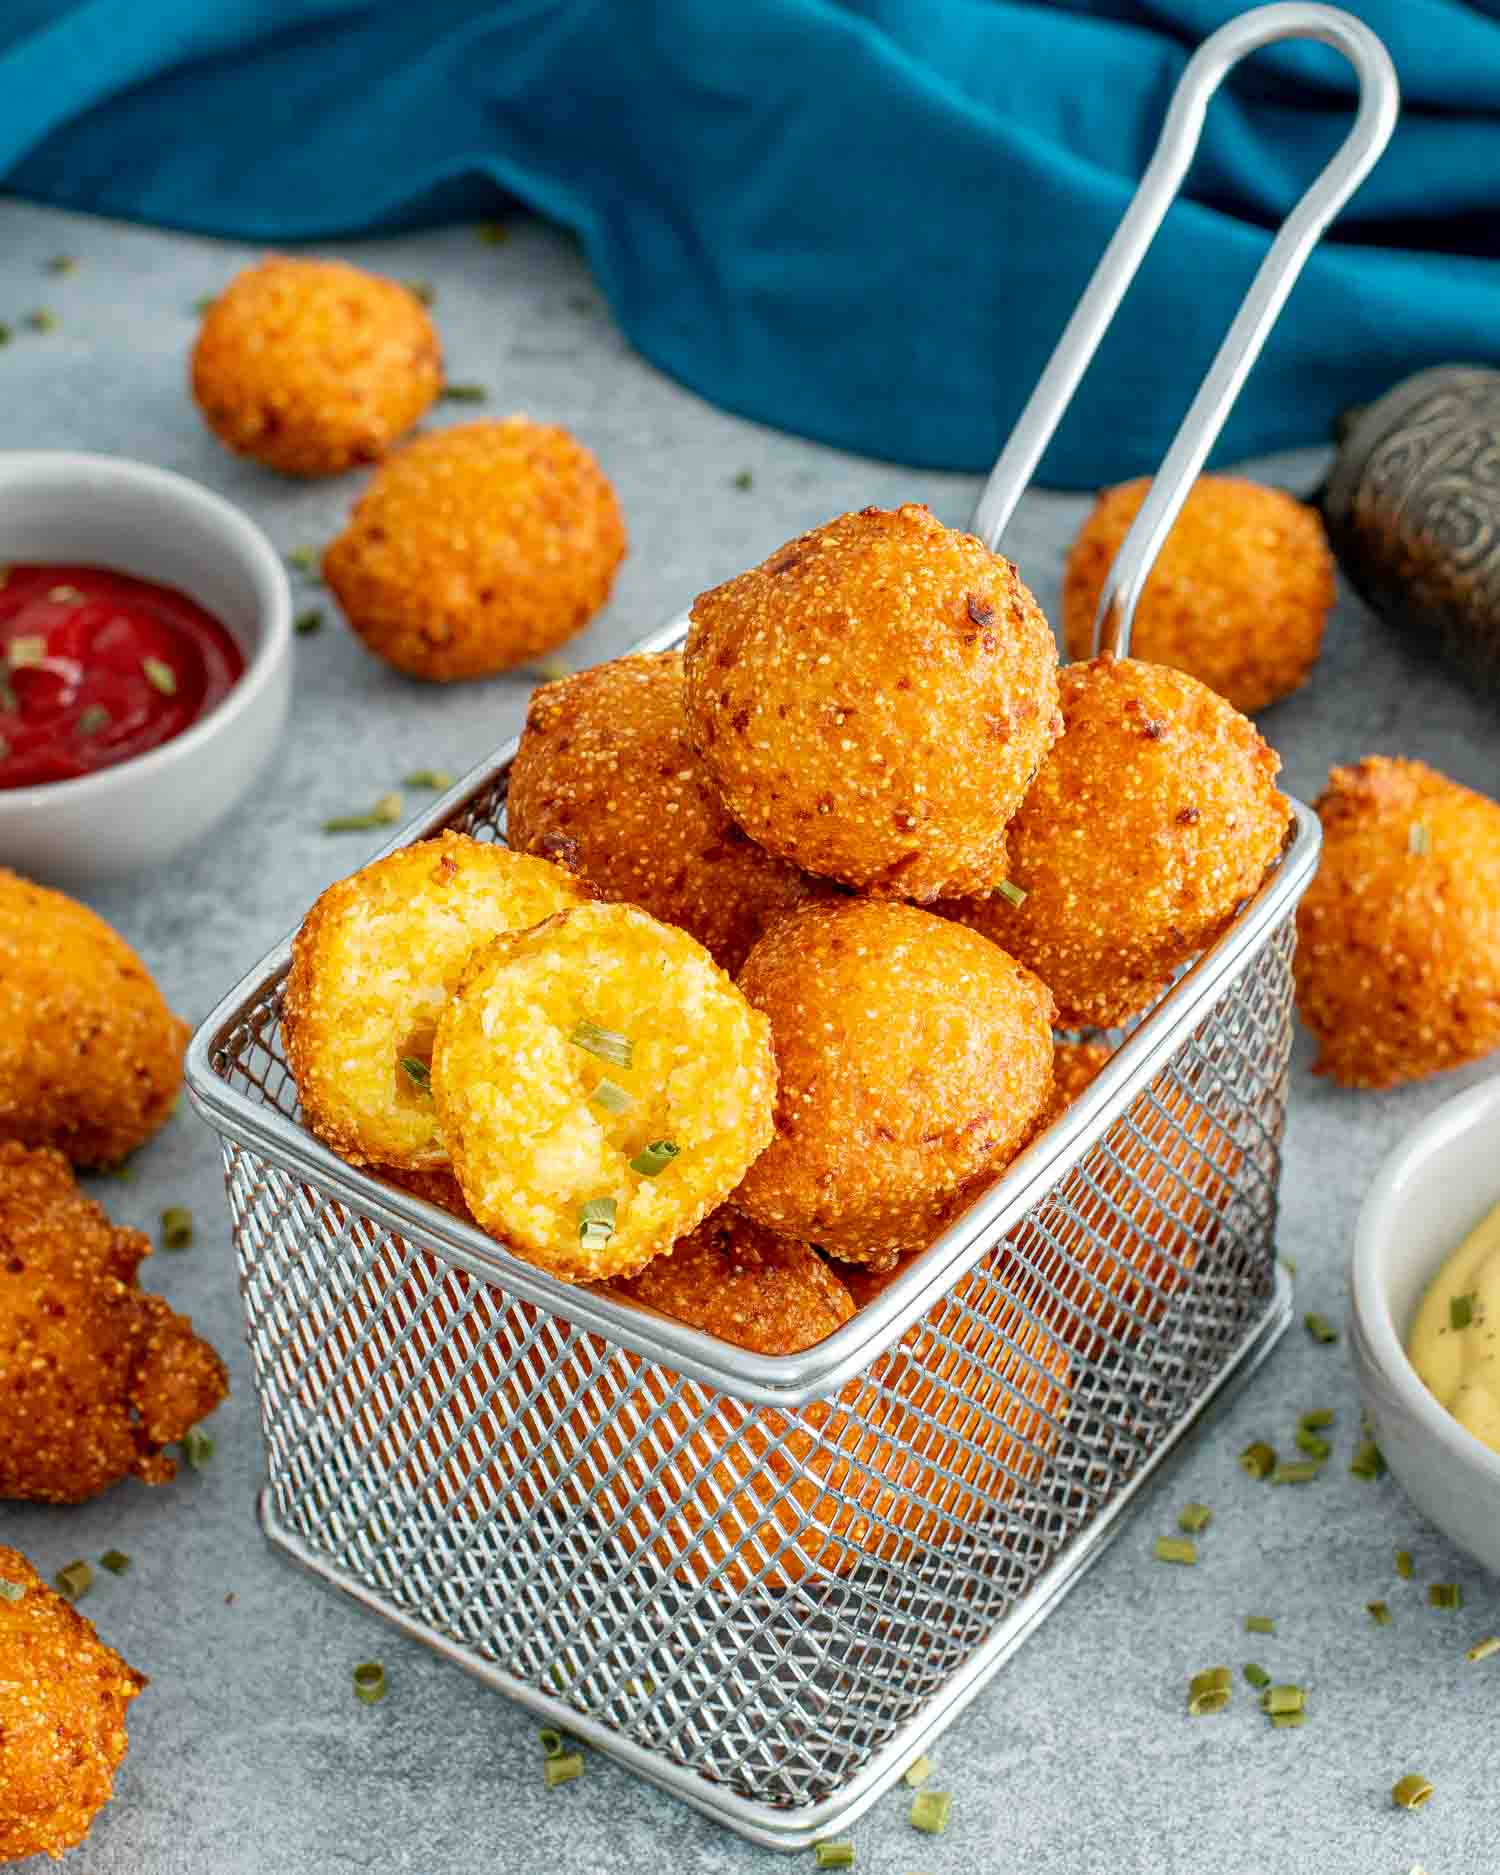 a basket full of freshly made hush puppies.